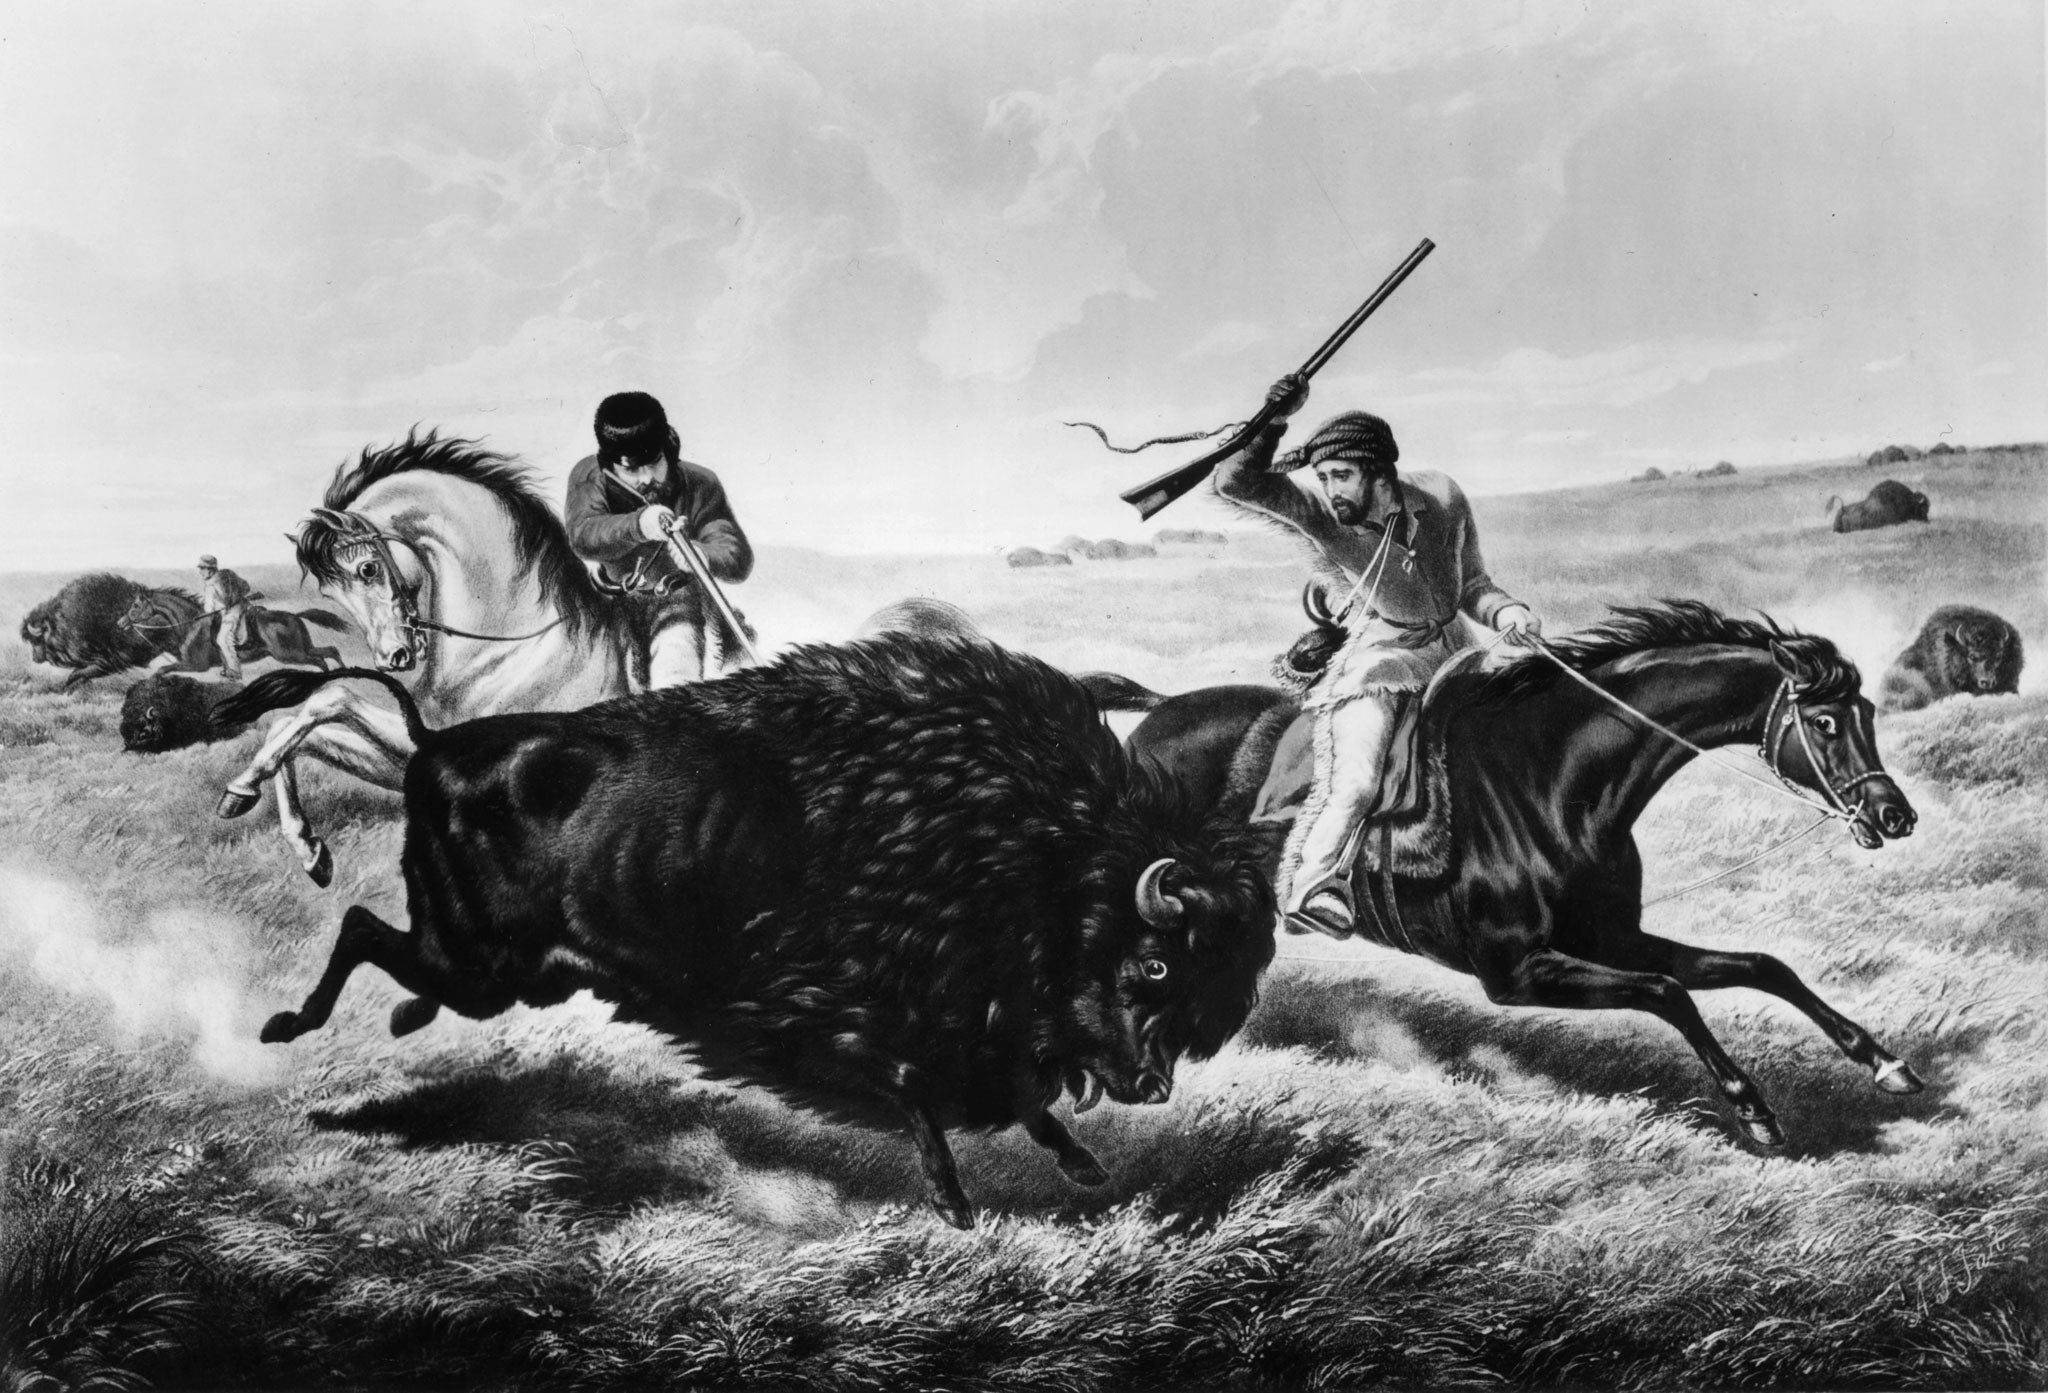 Searching for the sublime: Hunters shooting buffalo, 1862